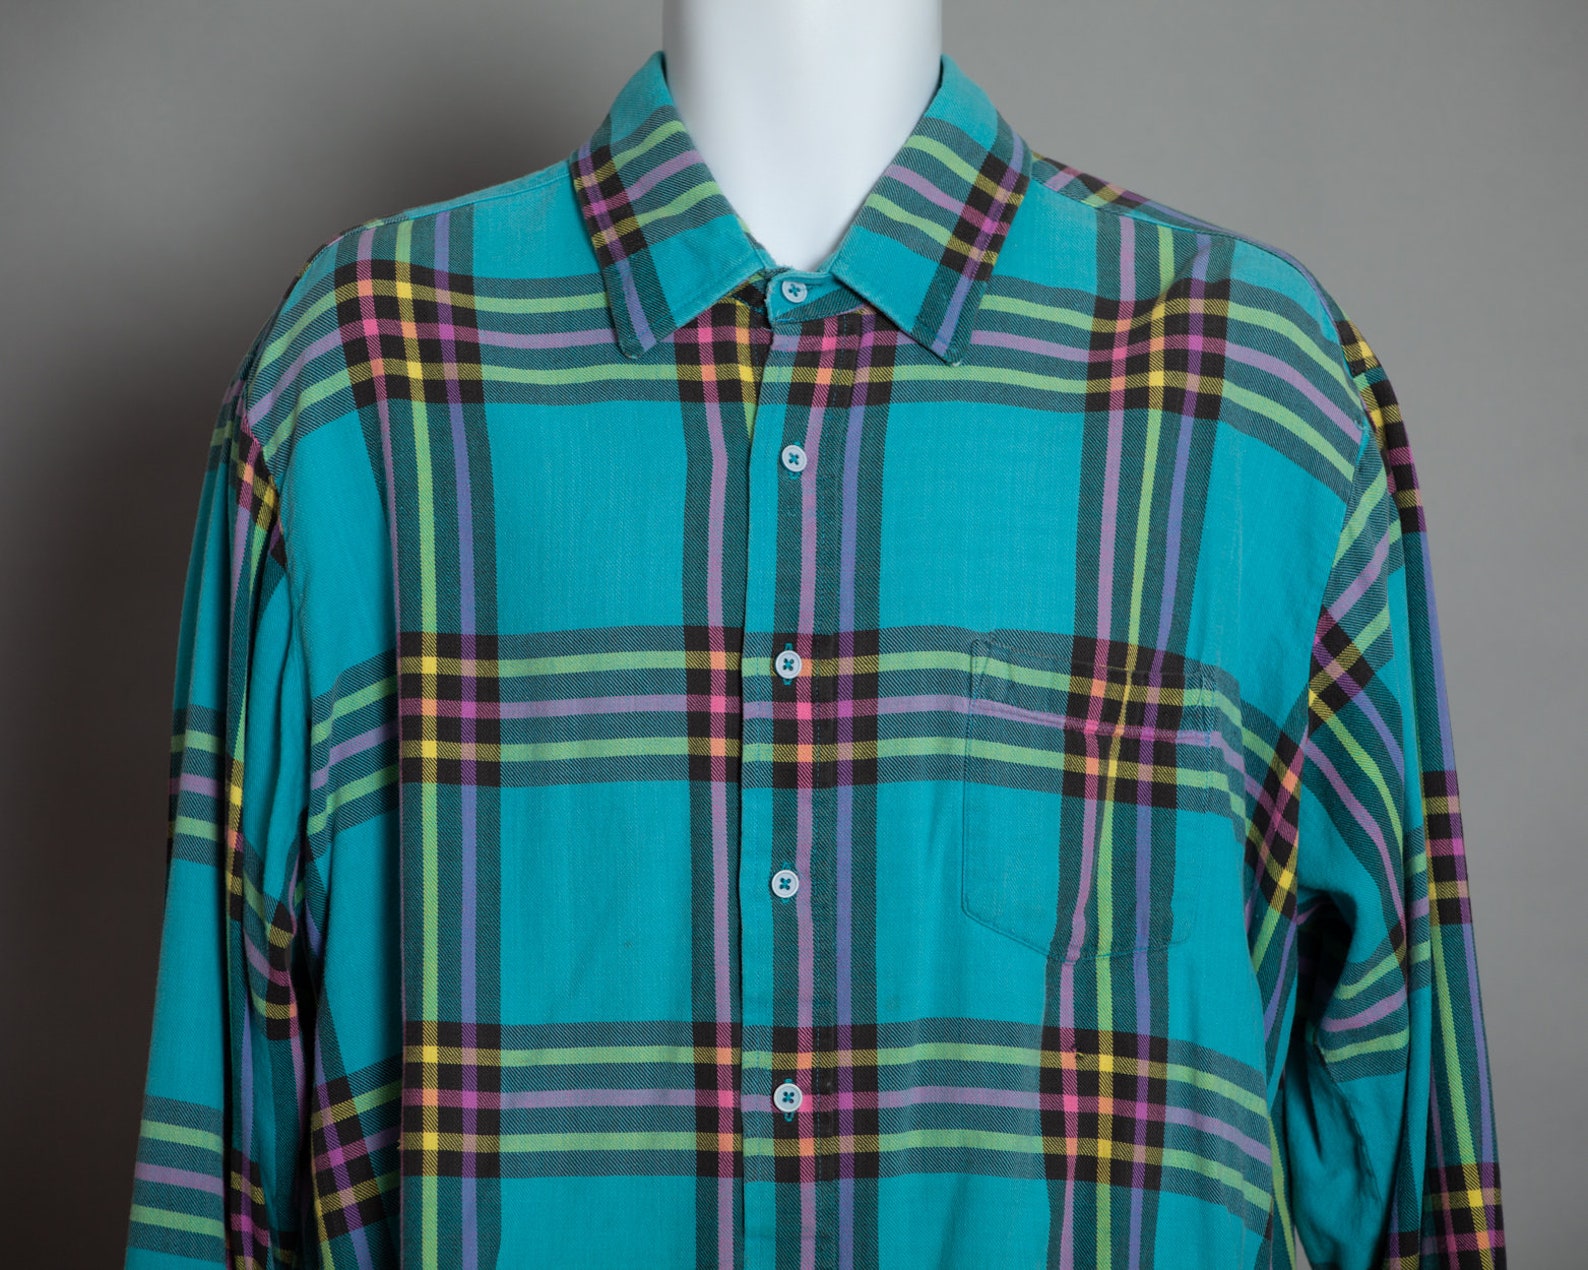 80s 90s Men's Colorful Plaid Shirt With Wear - Etsy